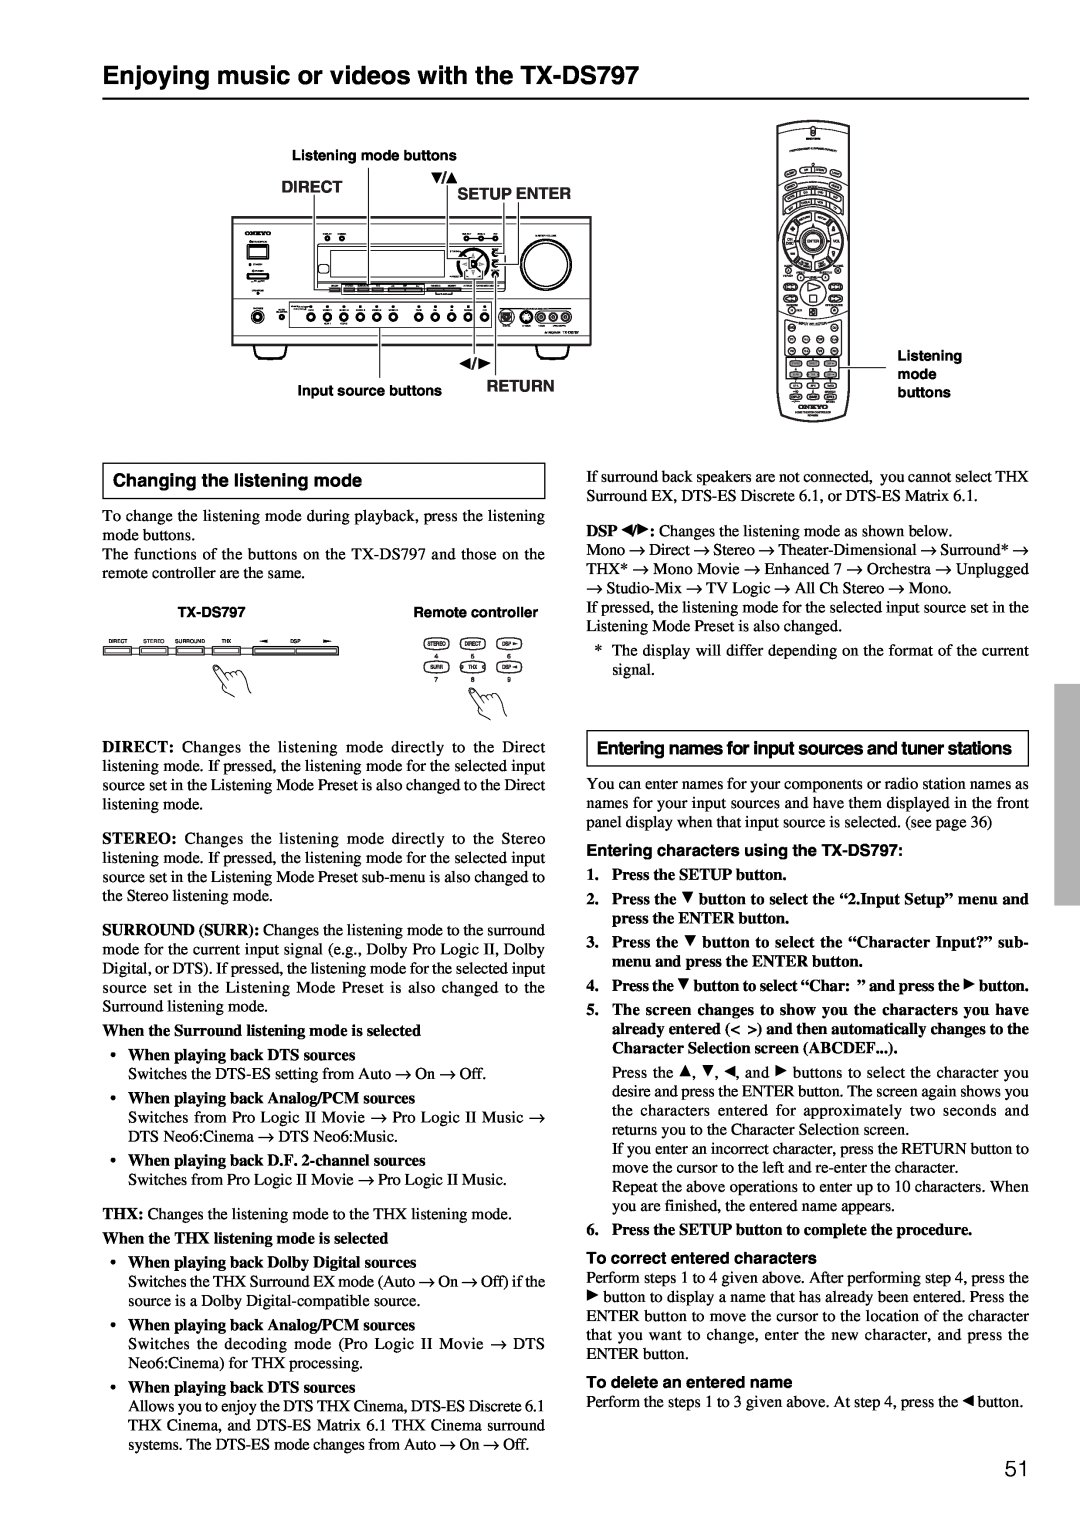 Onkyo instruction manual Enjoying music or videos with the TX-DS797, Changing the listening mode 